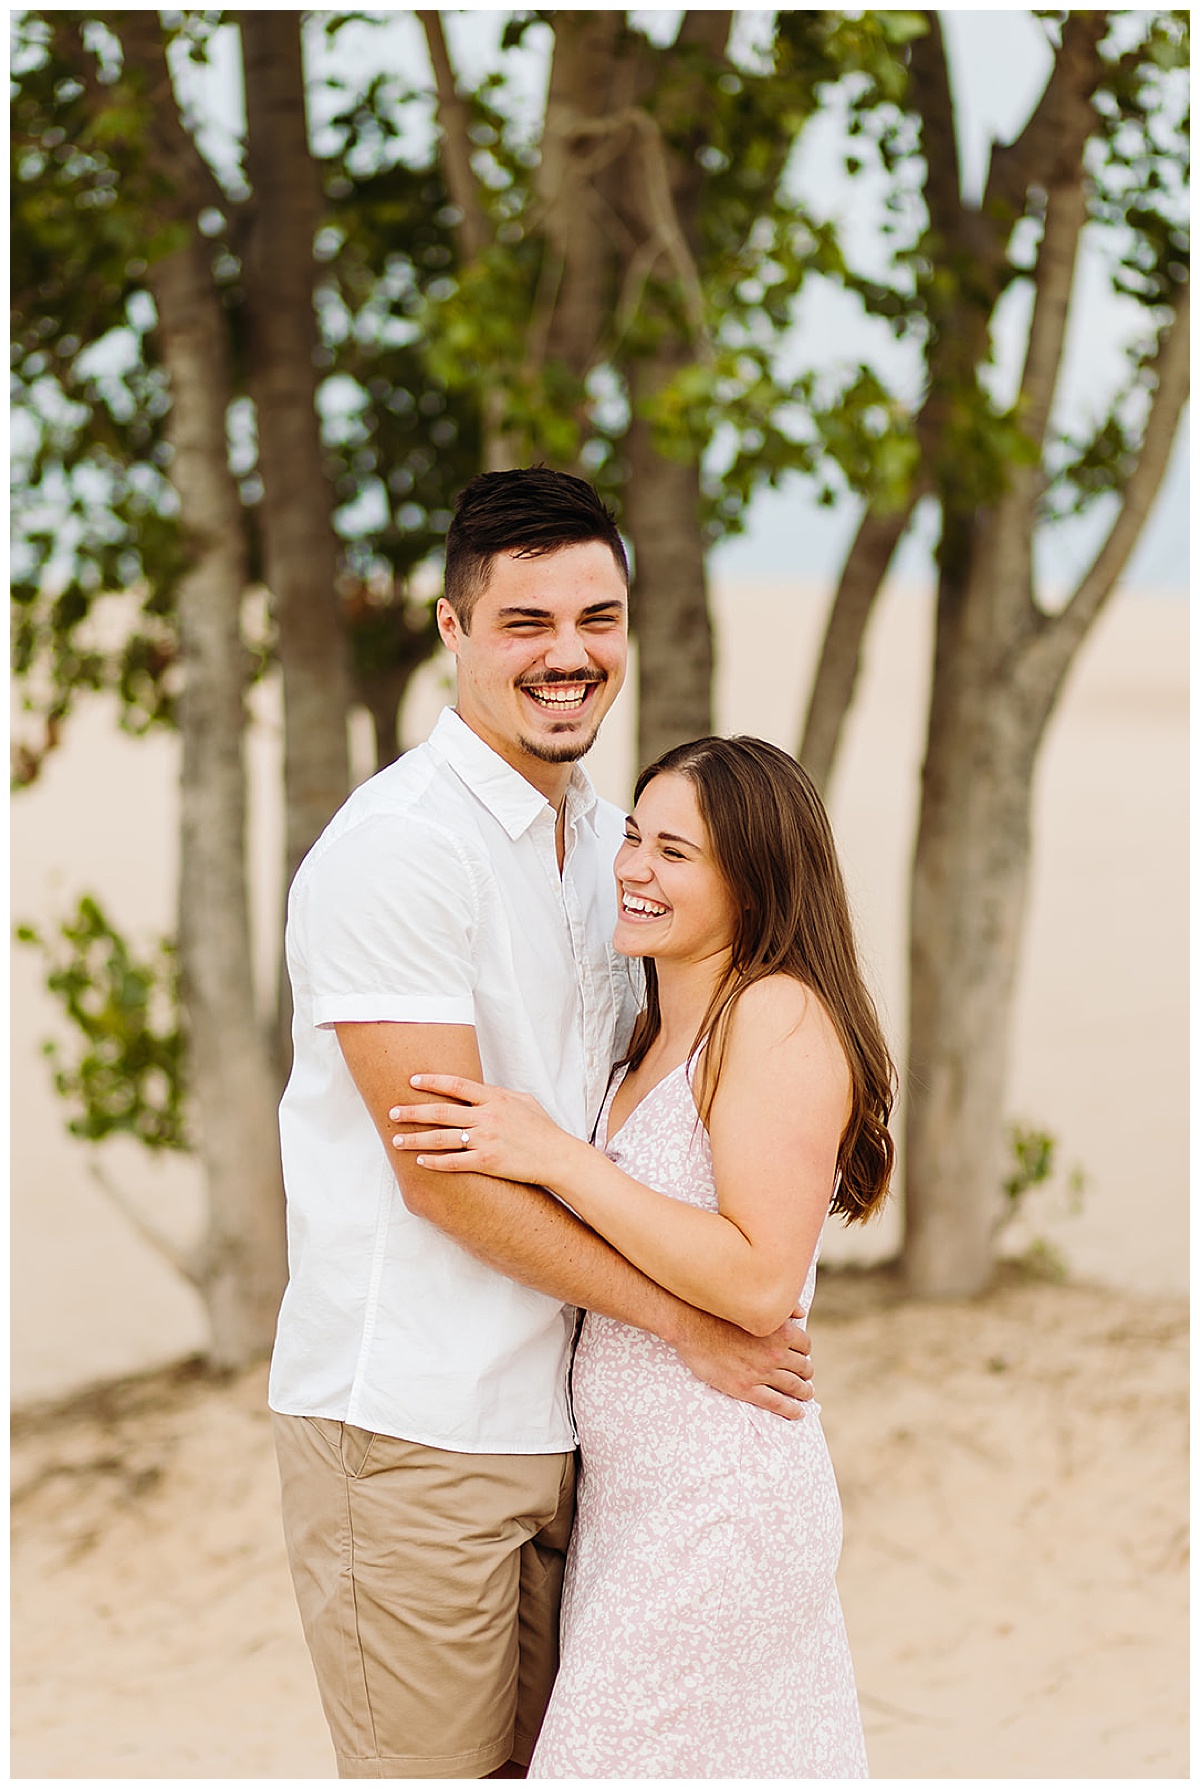 Fiancés laugh by a tree in the san dunes for Detroit Wedding Photographer